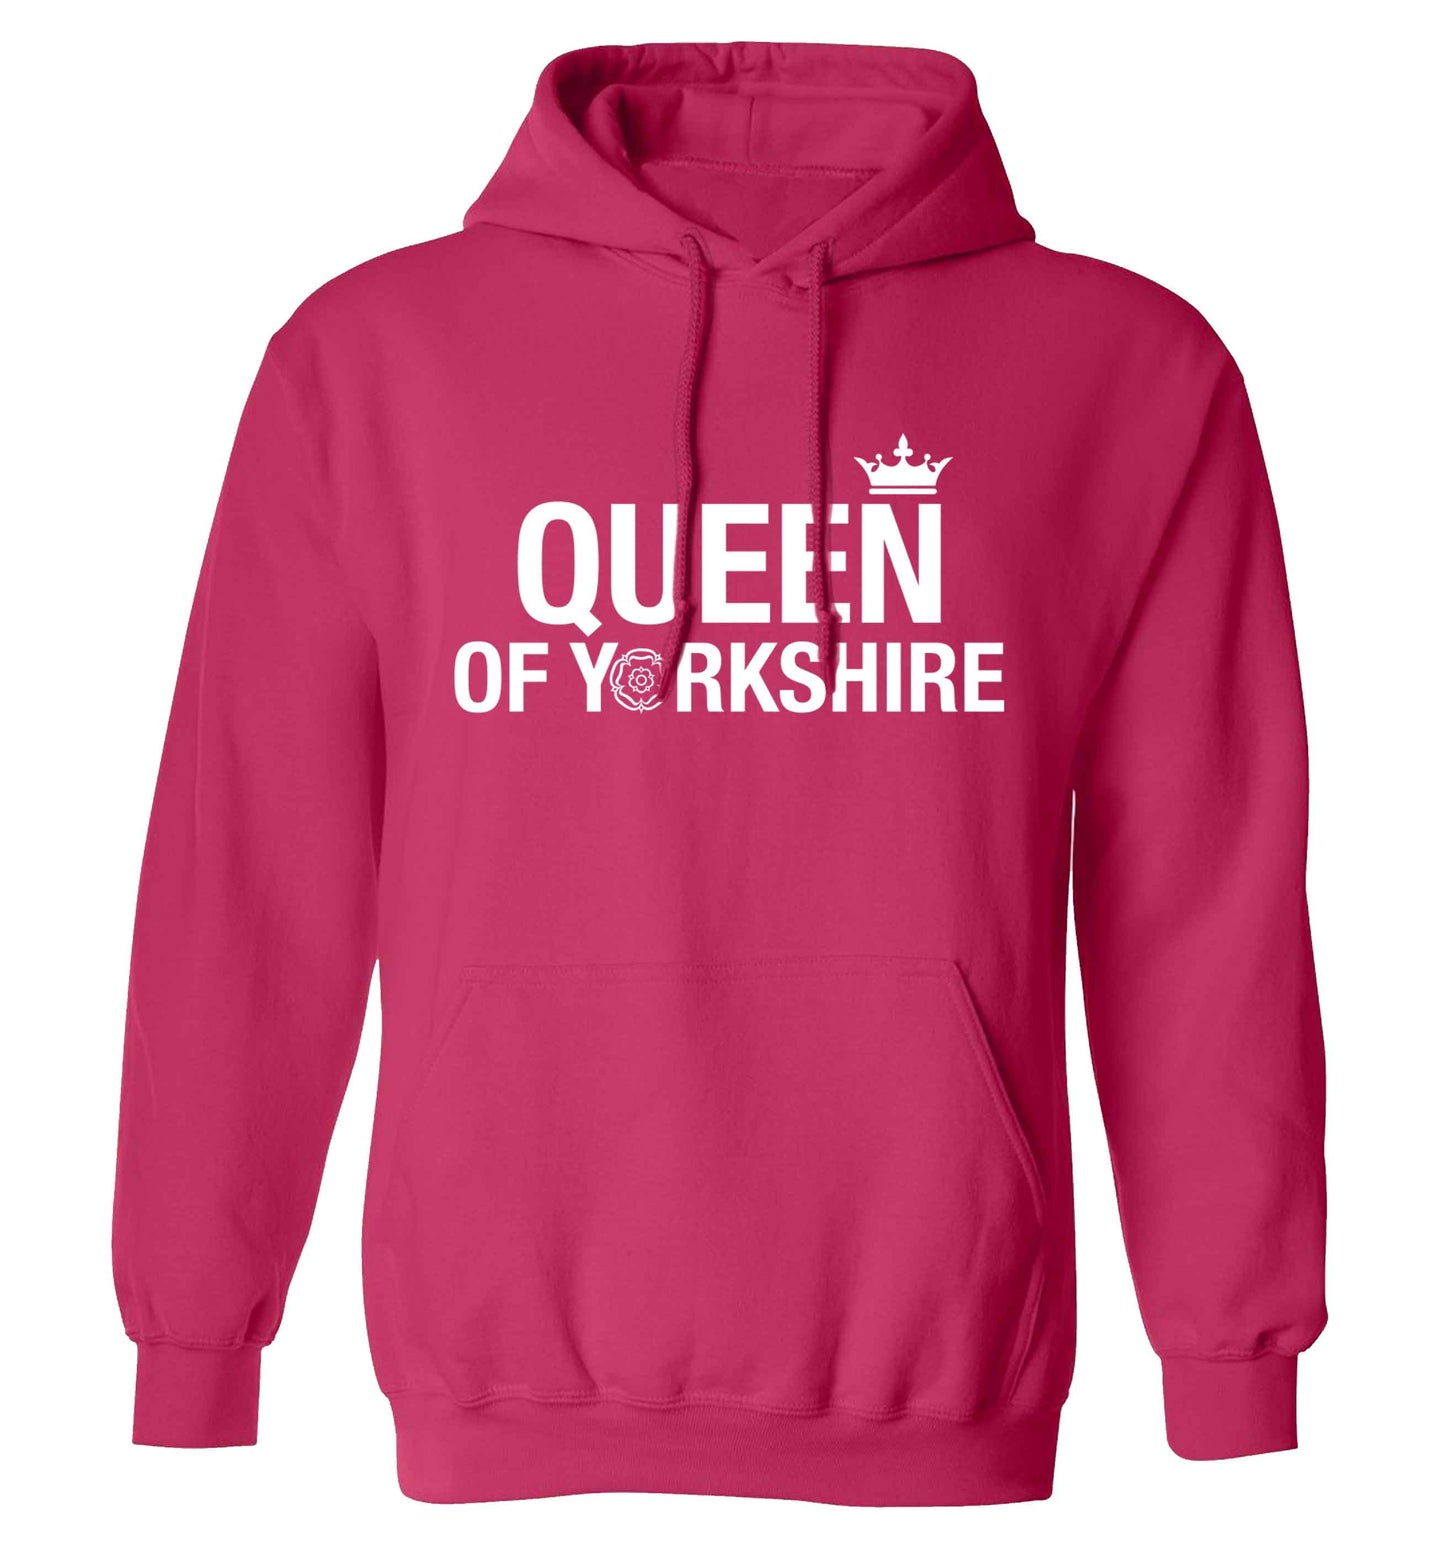 Queen of Yorkshire adults unisex pink hoodie 2XL